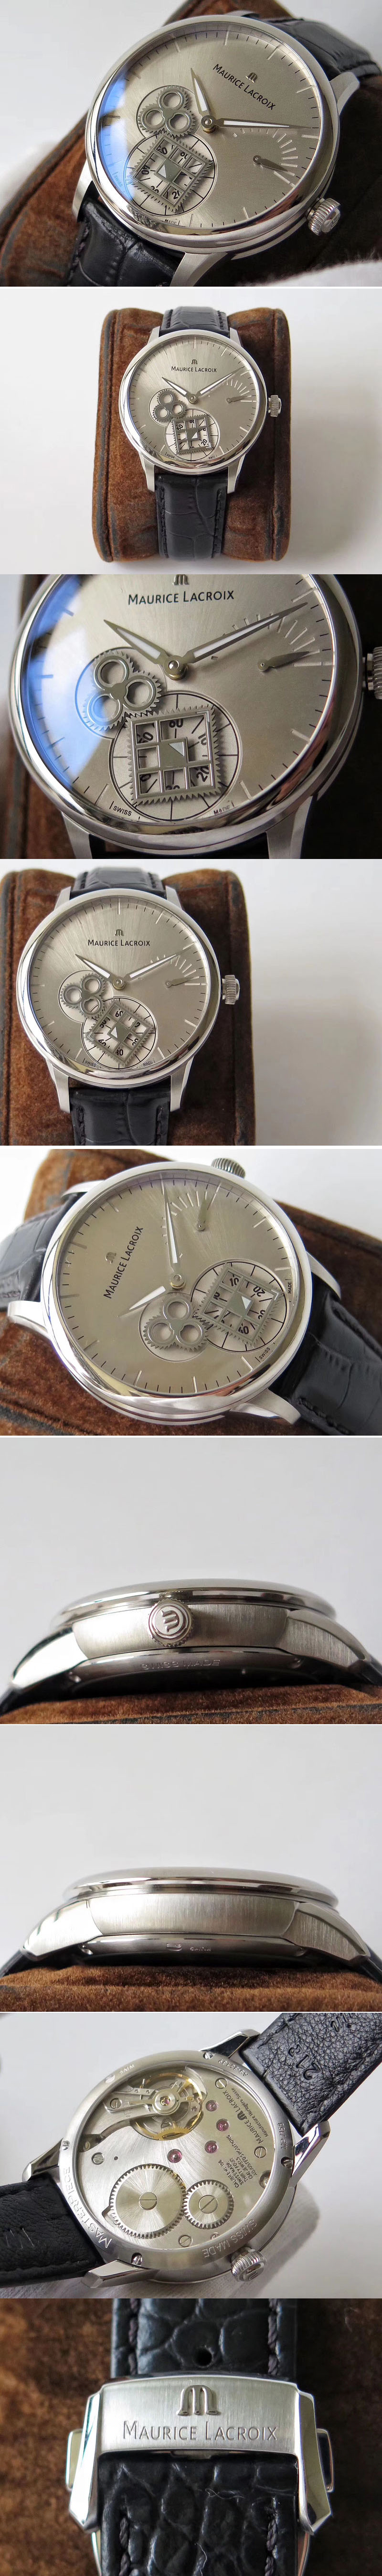 Replica Maurice LeCroix Watches